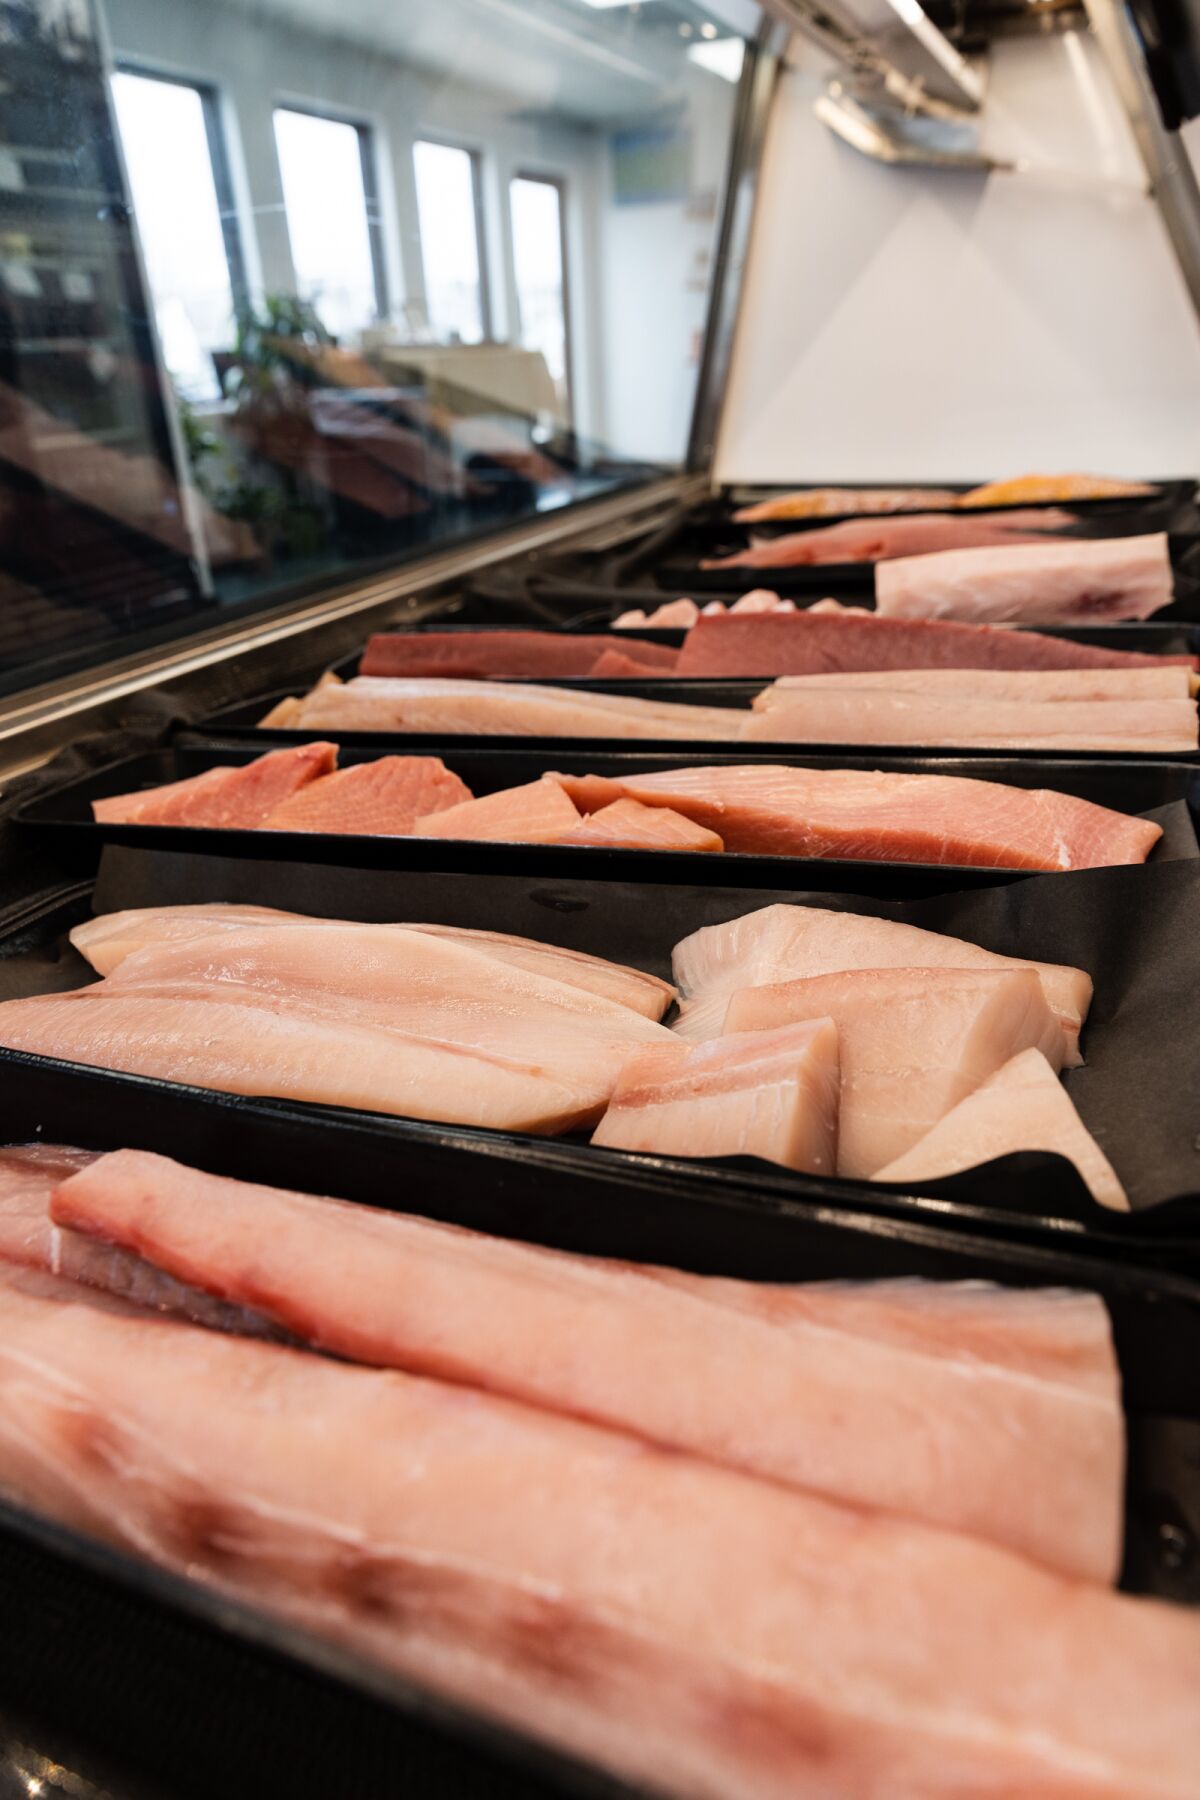 Locally caught fish fillets are on display at TunaVille Market and Grocery.